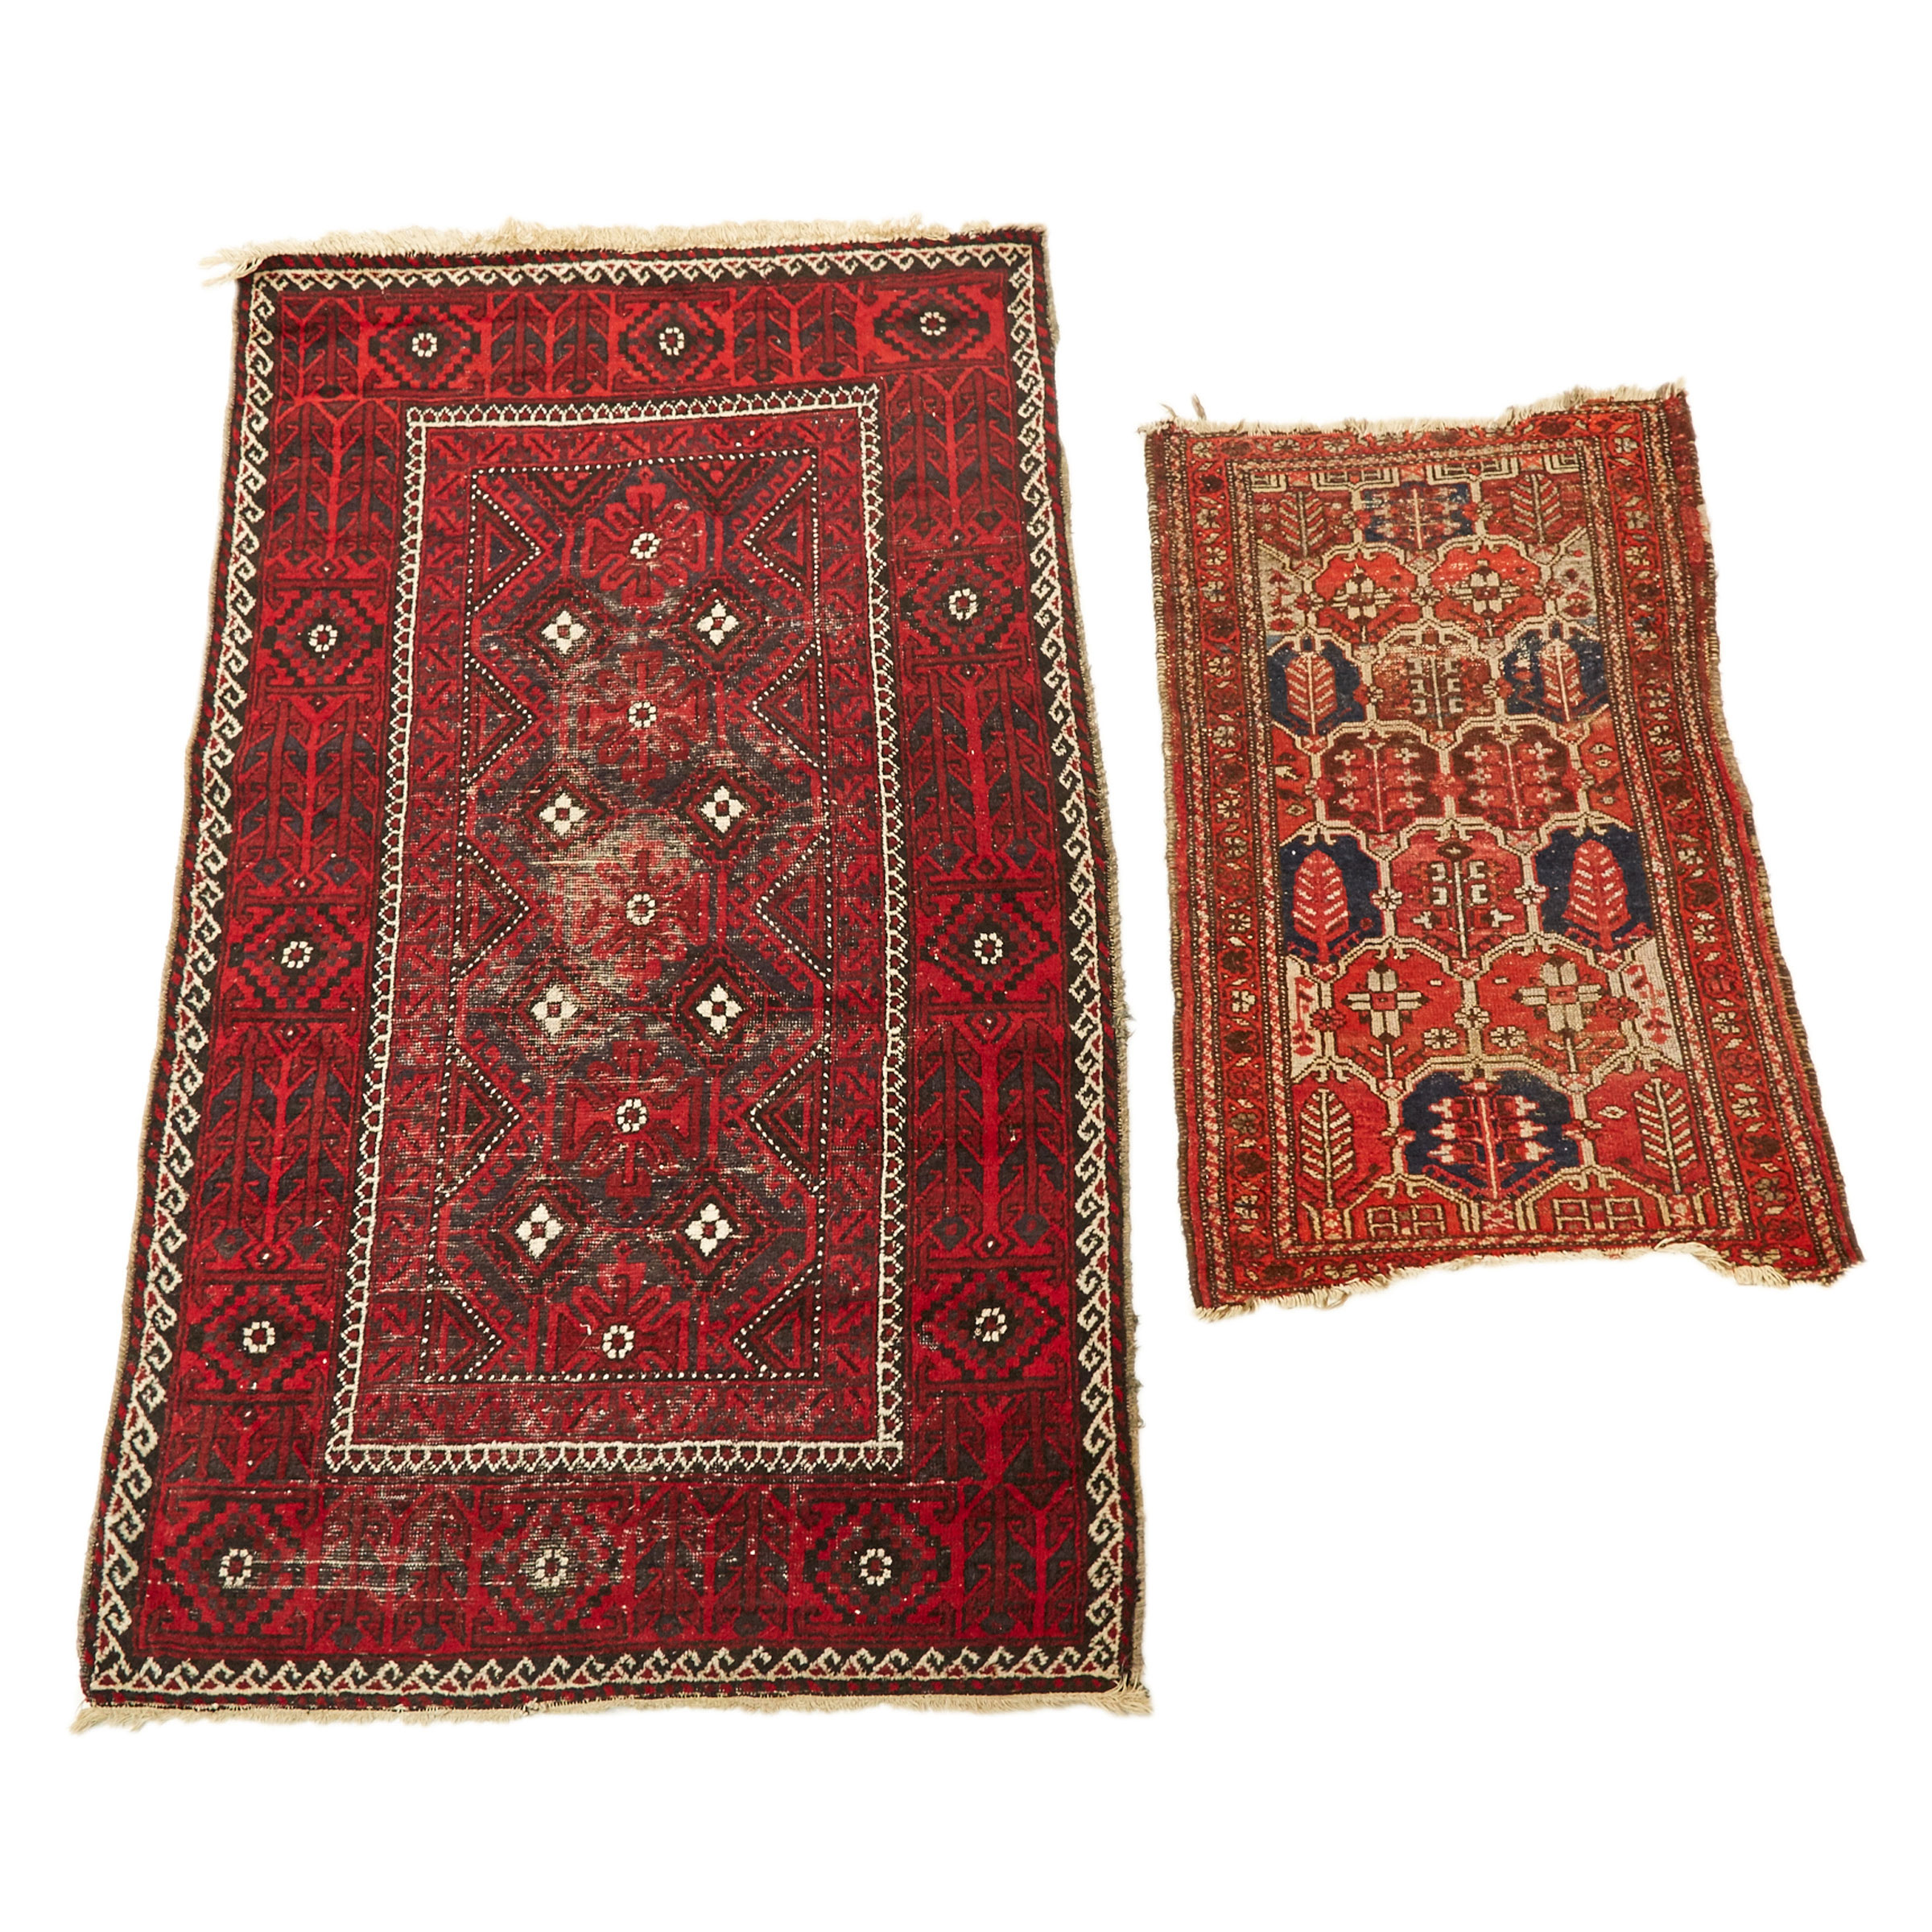 Baluchi Rug, Central Asia, together with a Kurdish Rug, both mid 20th century